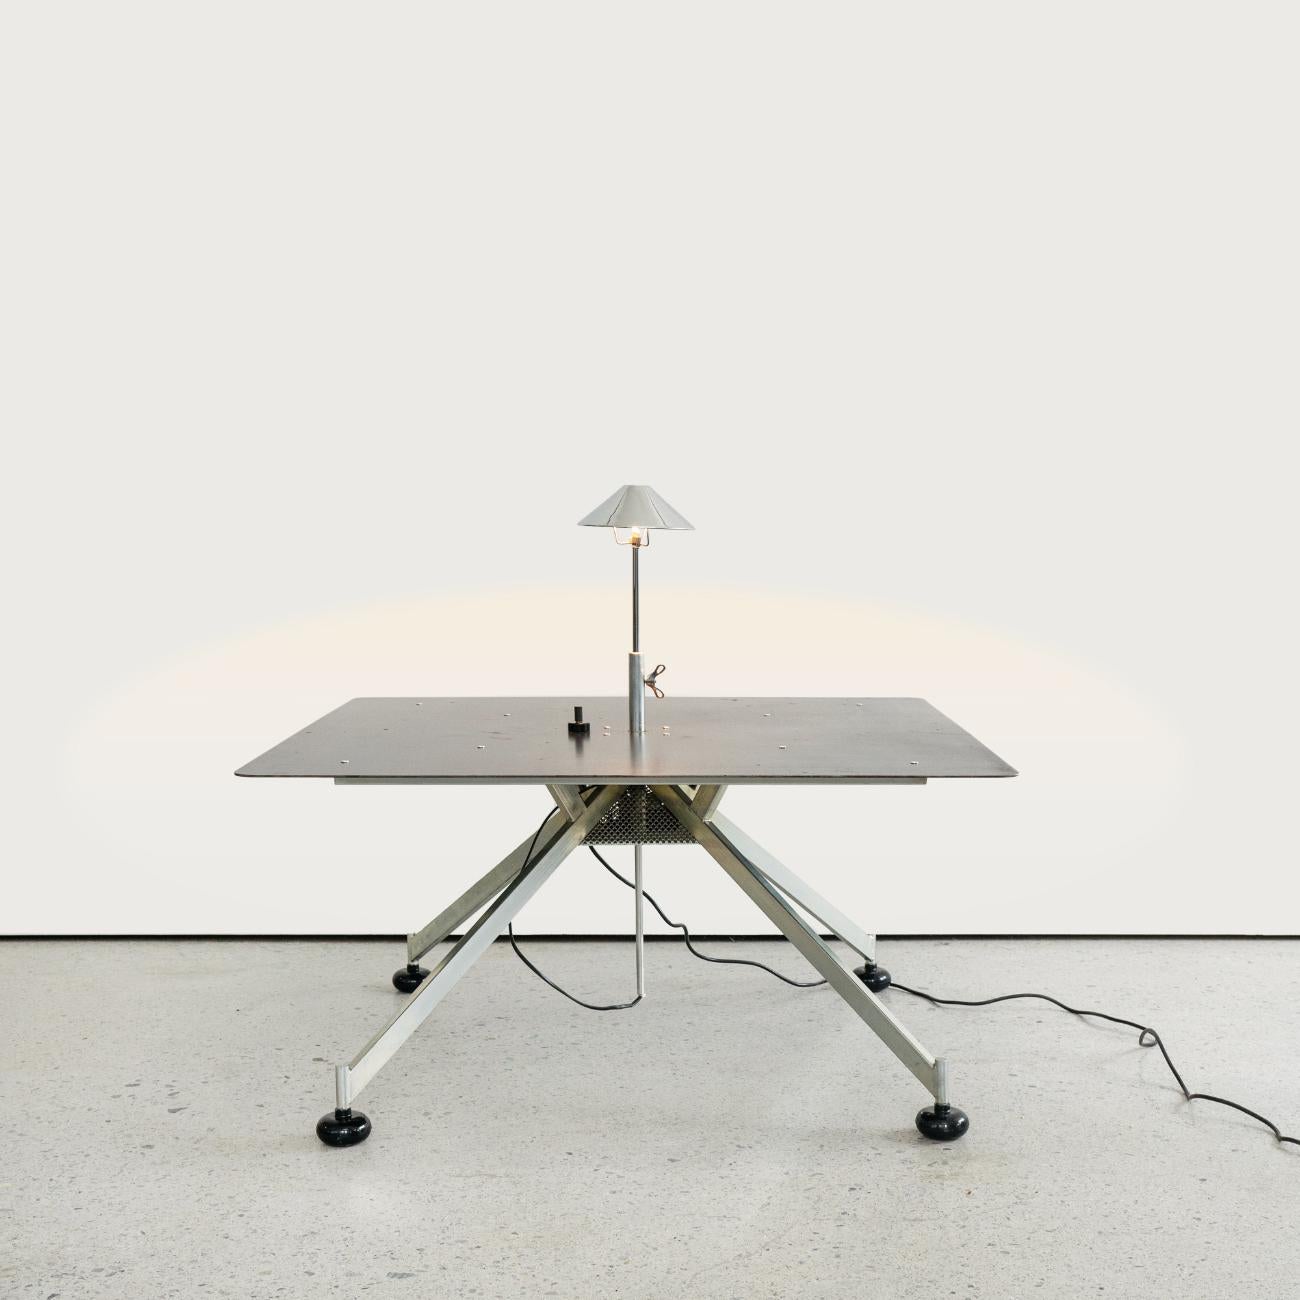 Italian Mid-Century Modern Apocalisse now coffee table by Carlo Forcolini, 1980s.
Apocalisse now square coffee table in iron with legs in pyramid structure. In the center of the piano is the lamp, the height and intensity of the light of the lamp